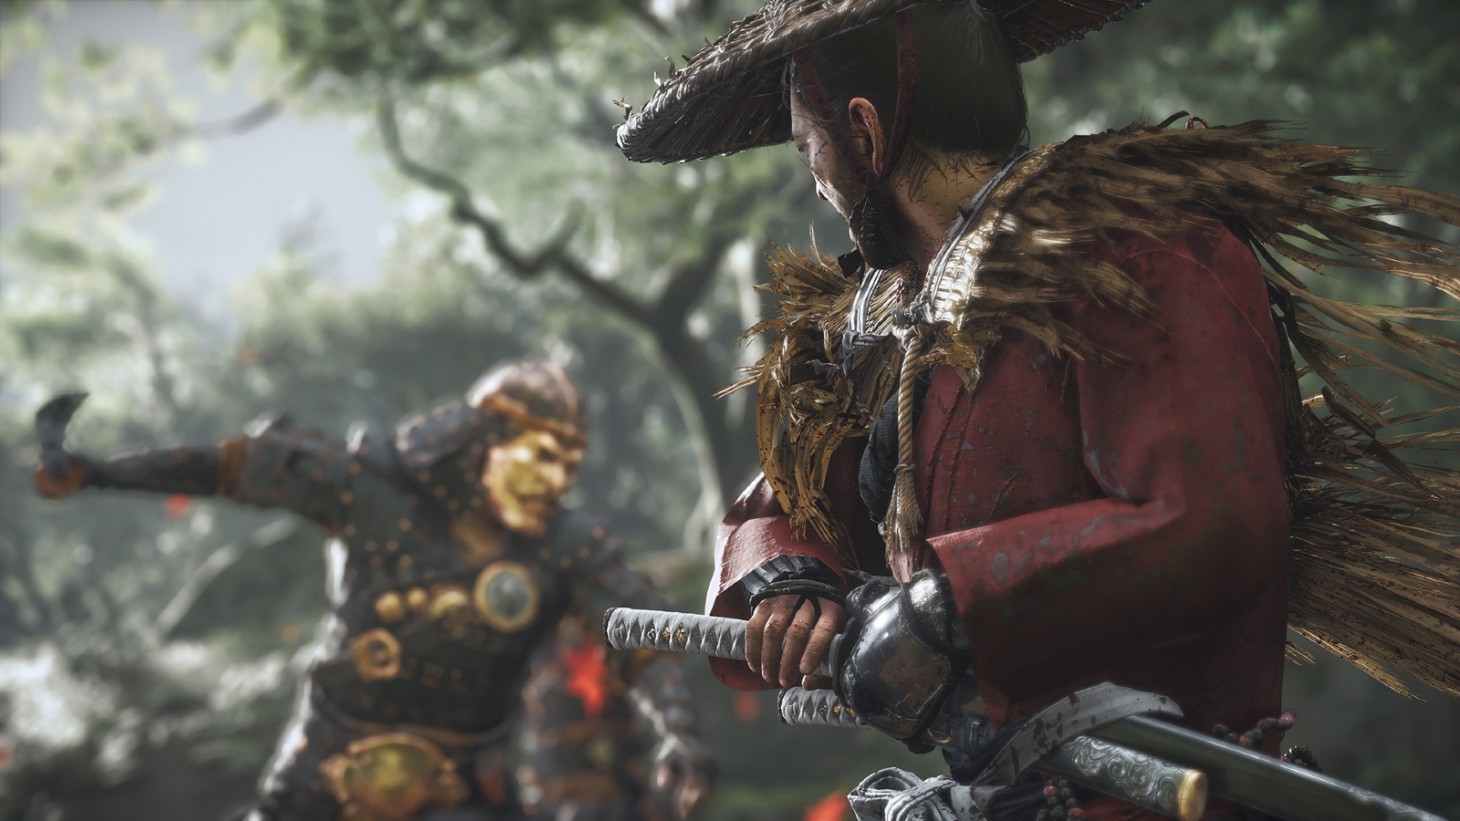 Ghost of Tsushima Legends guide for PS5 and PS4